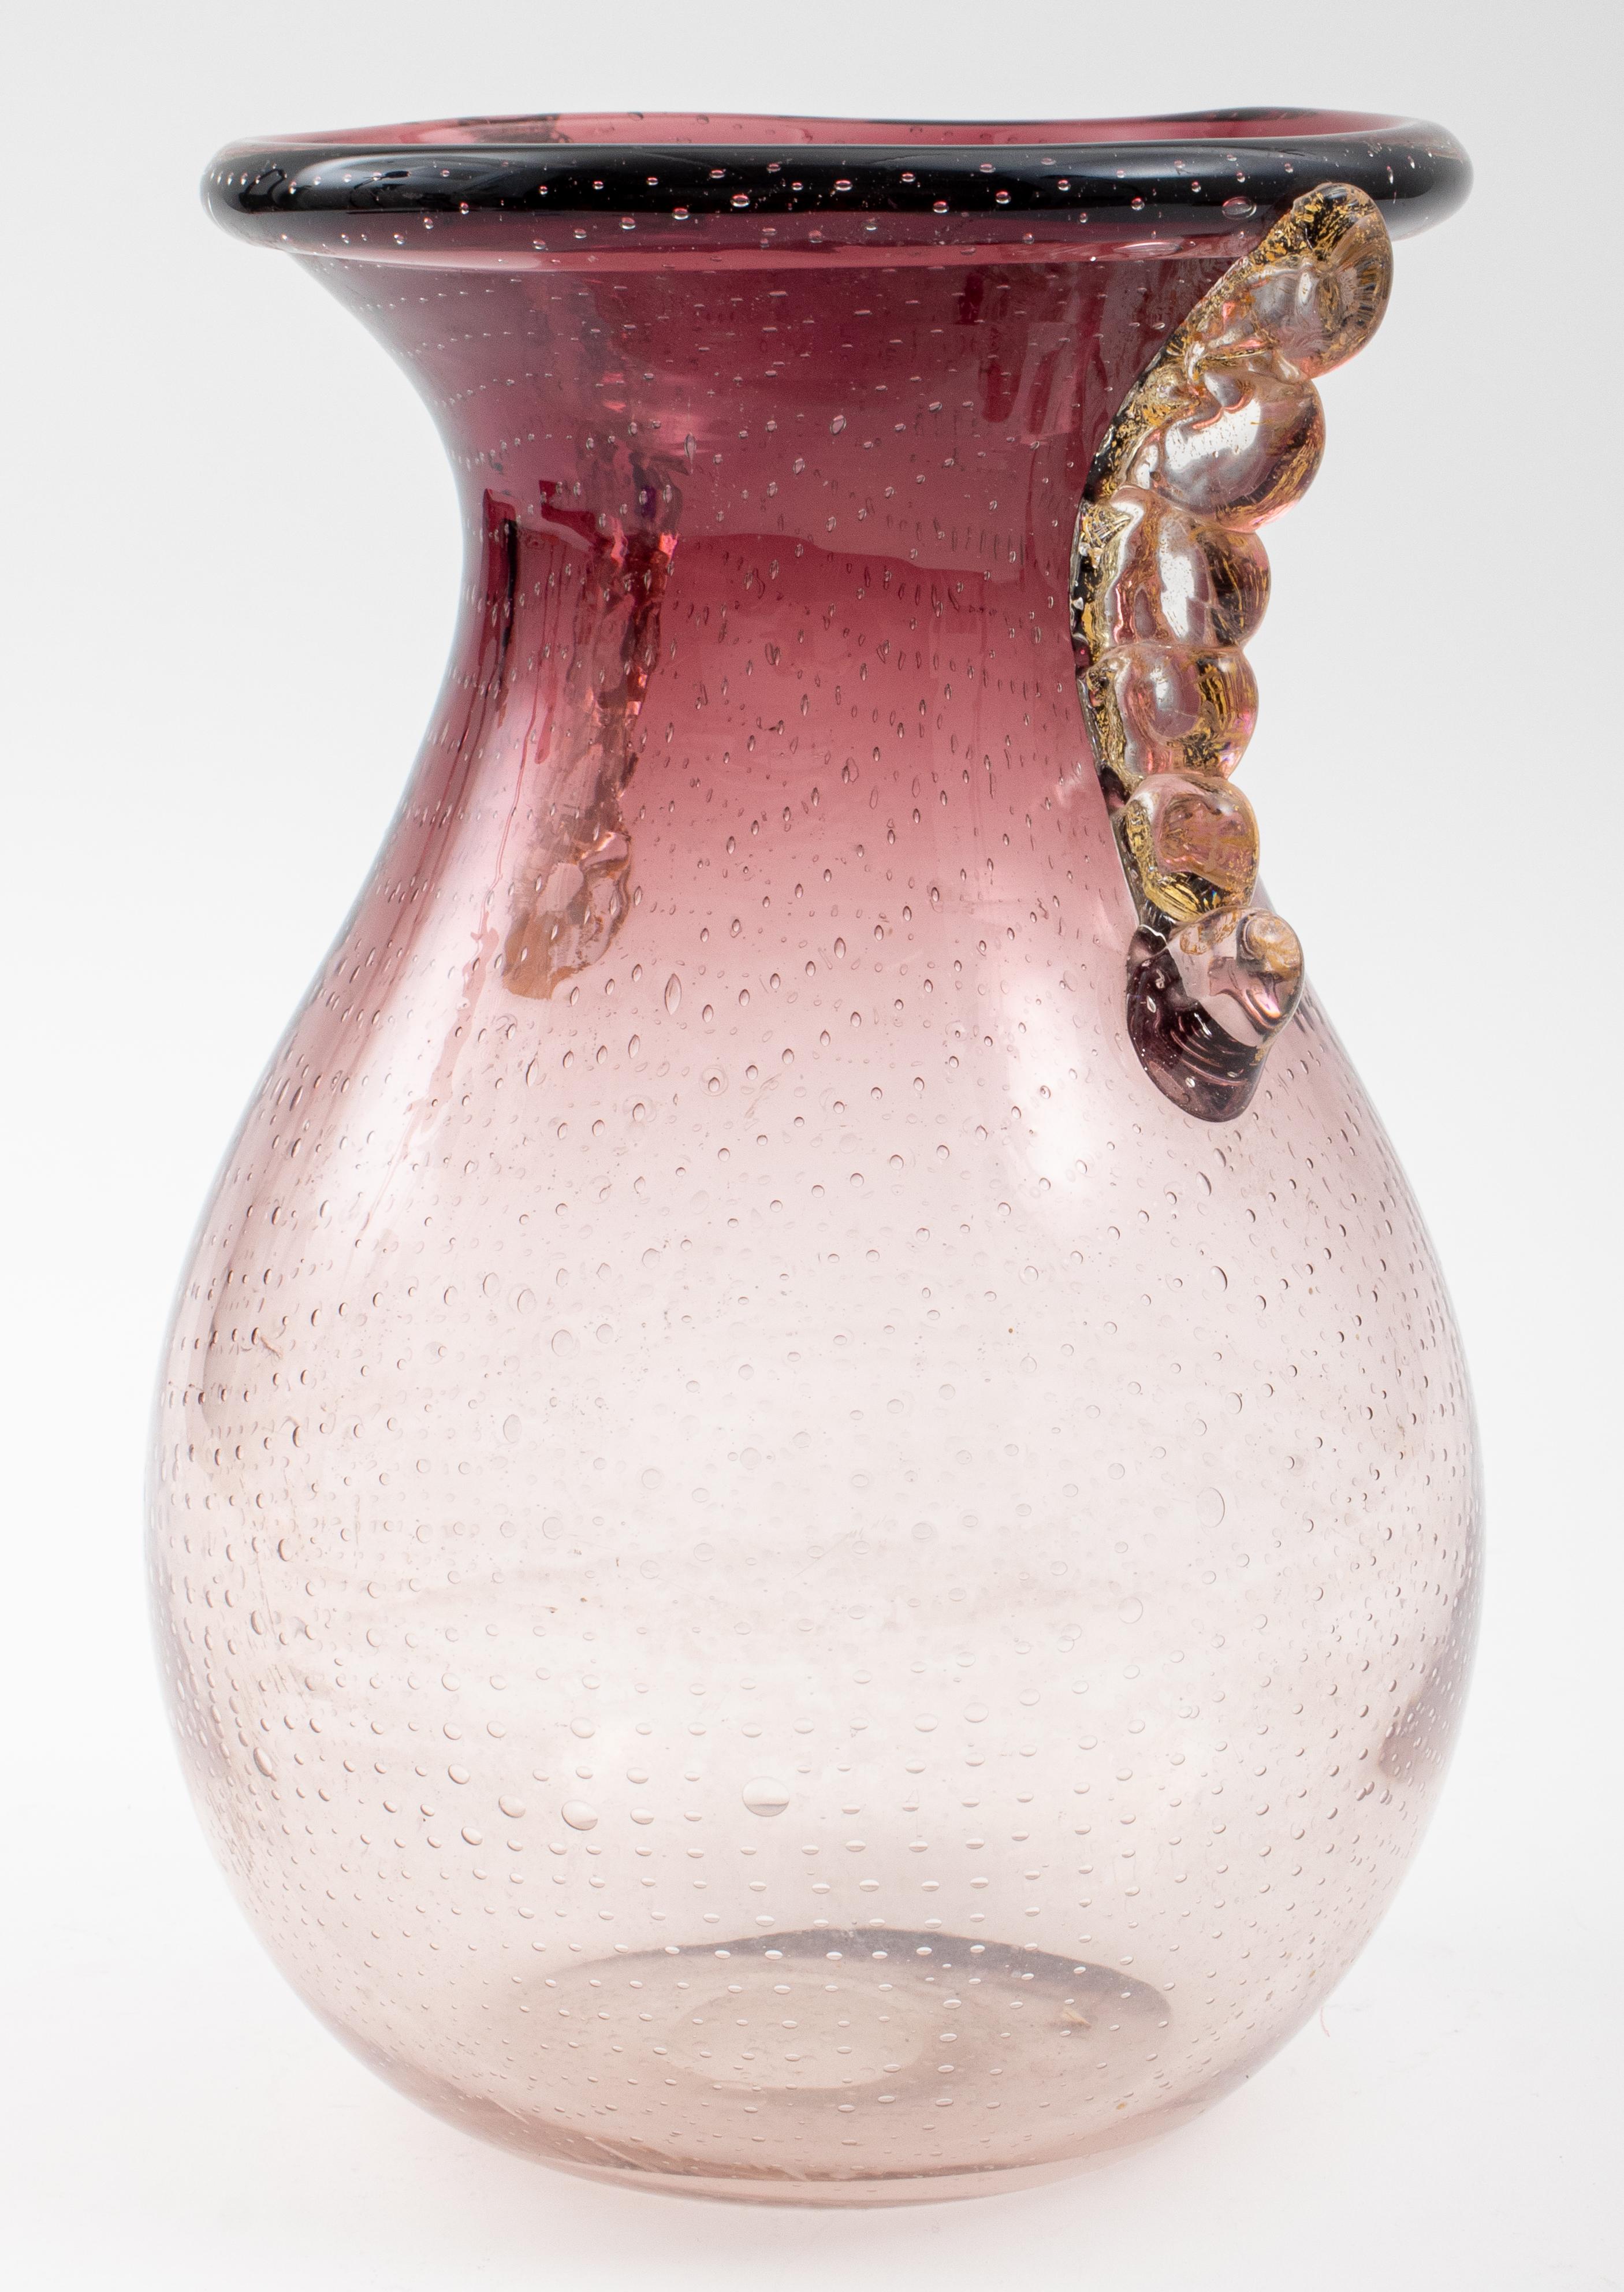 Italian Art Deco Murano art glass vase, attributed to Ercole Barovier (1889-1974) for Barovier & Toso, clear to muddled rose controlled bubble glass with applied gold-flecked glass handles to the sides, circa 1940's. 8.75